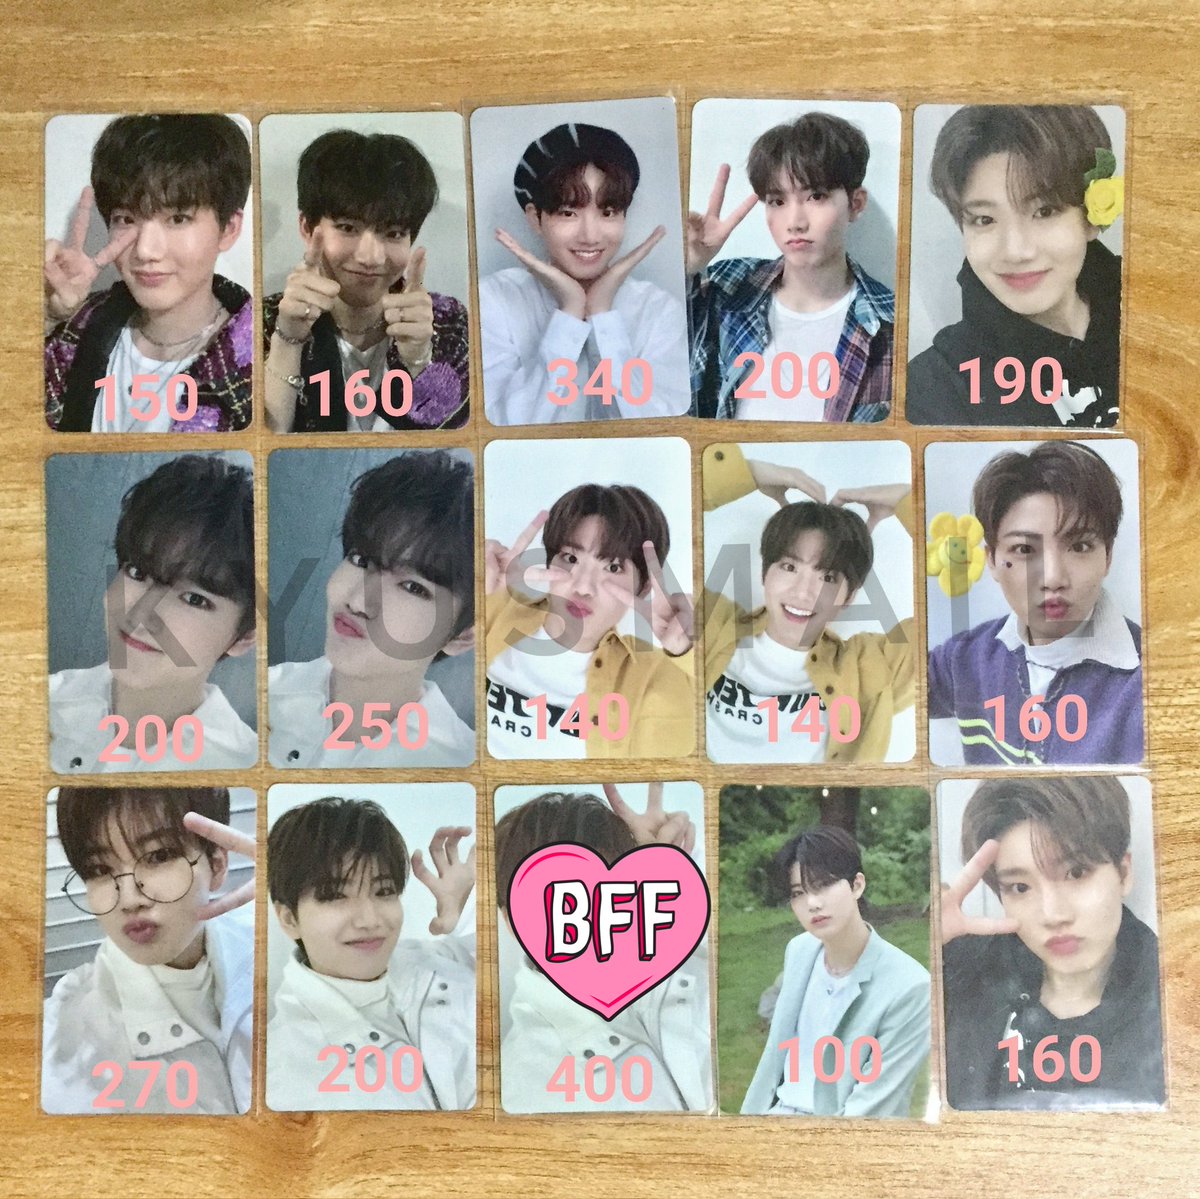 t. wts lfb ph trs — [ #soosells ]

𓂋 Treasure - Kim Junkyu photocards

i will be hosting a hatian ! will only get marked (Junkyu kit pc) 

✴︎ can steal if taking more except bff

ᝰ check moments before claiming